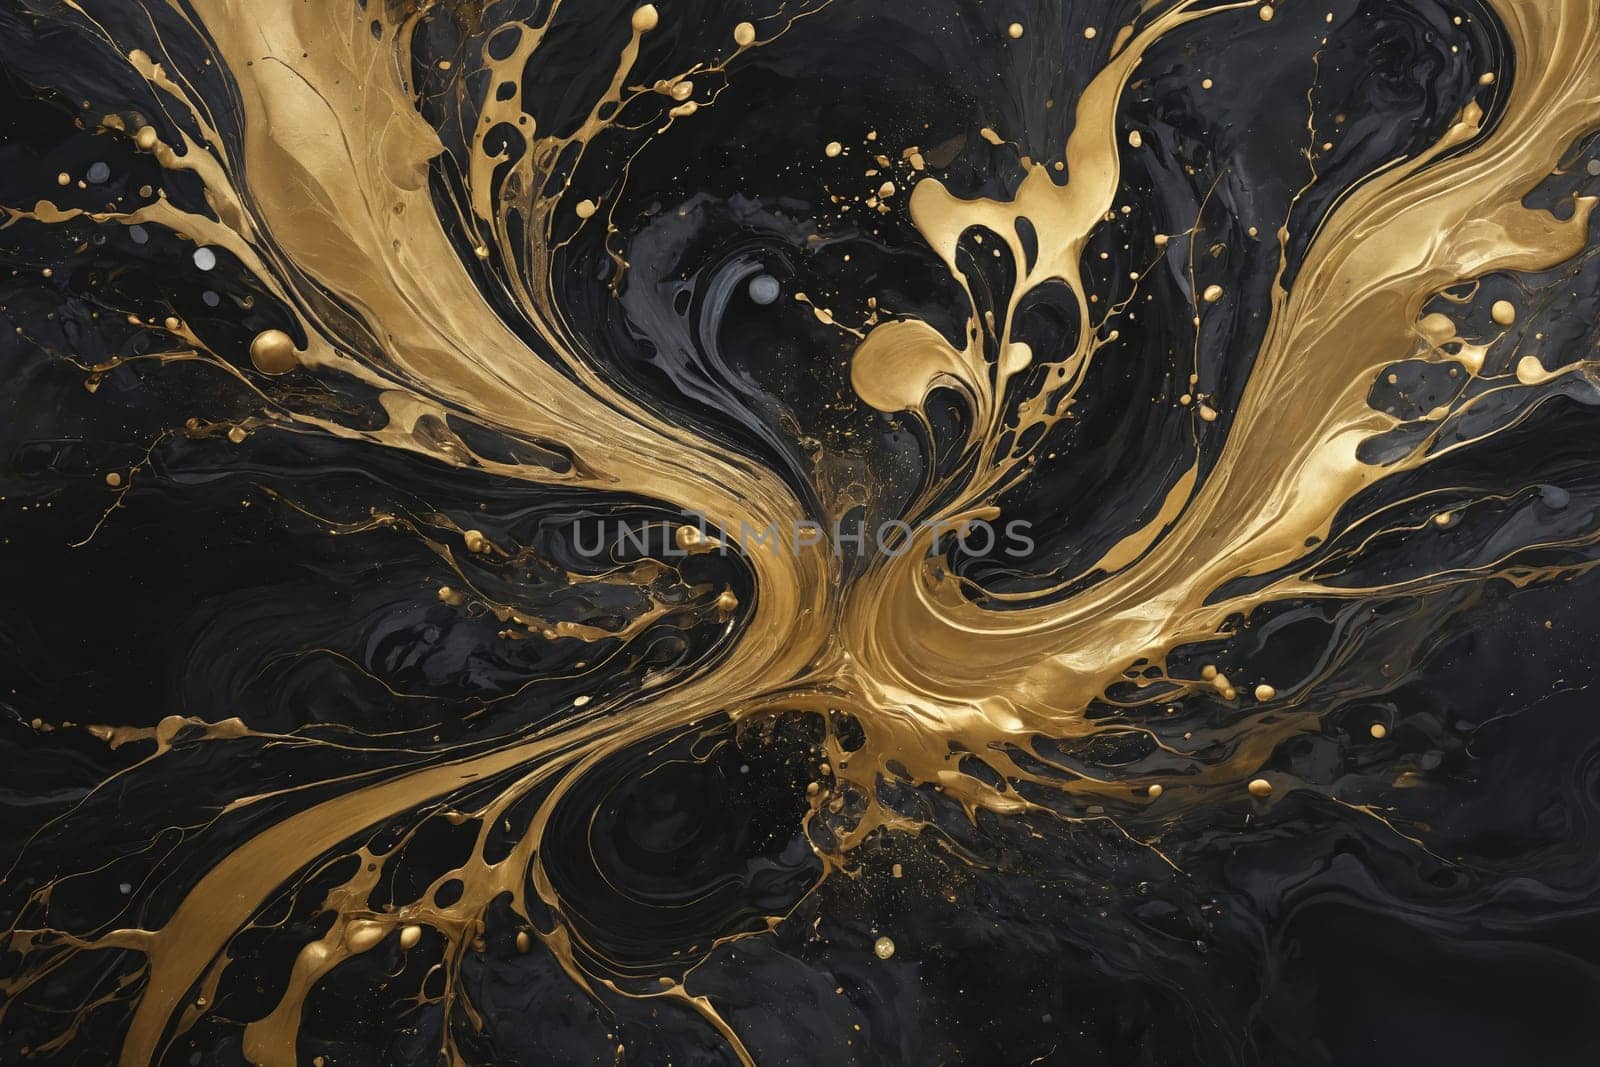 Mesmerizing Vortex: Close-Up of Swirling Black and Gold Paint by Andre1ns